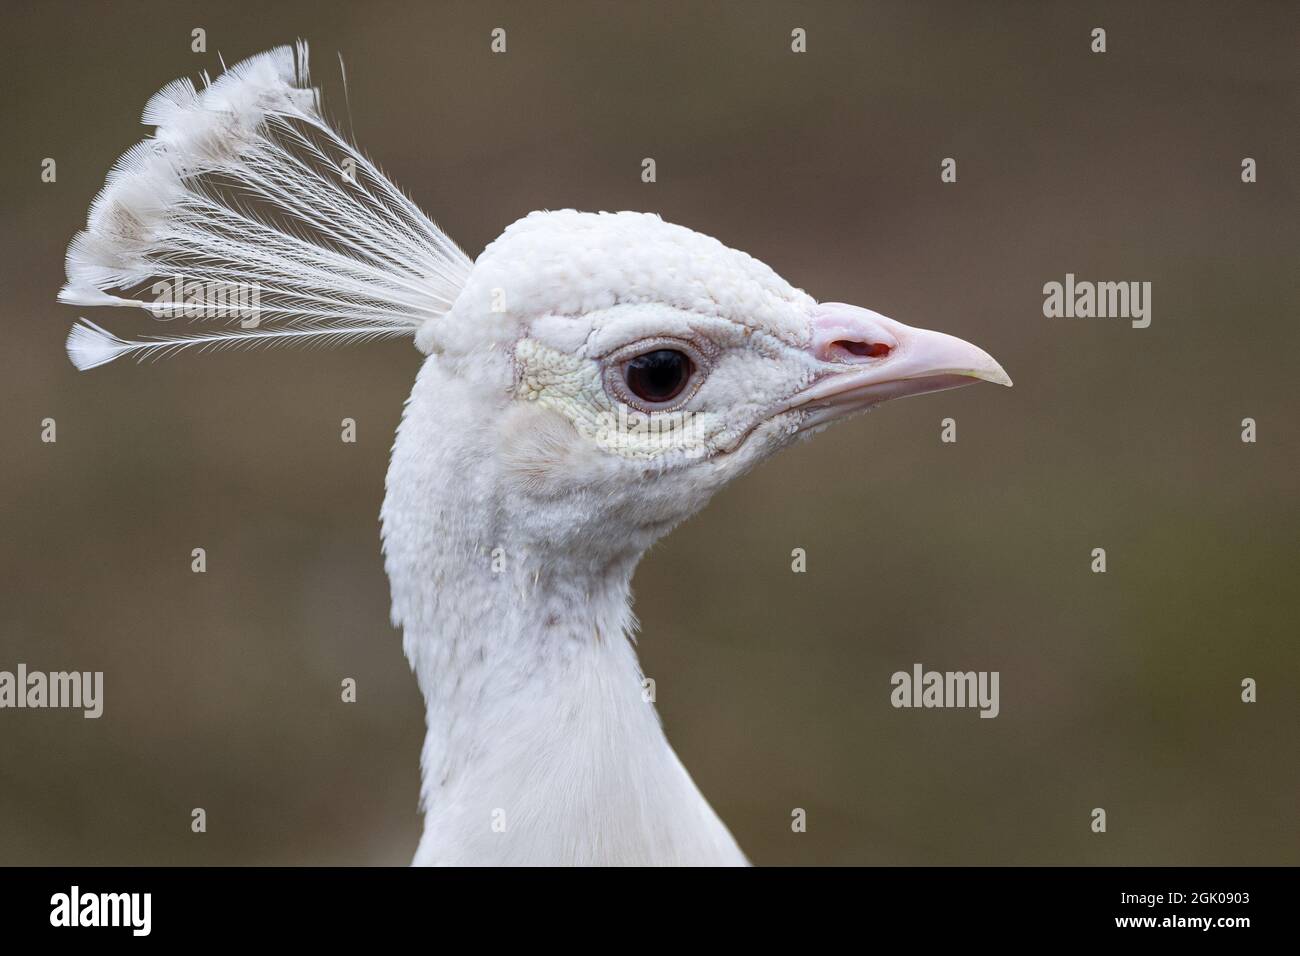 Portrait of a white peacock. Stock Photo